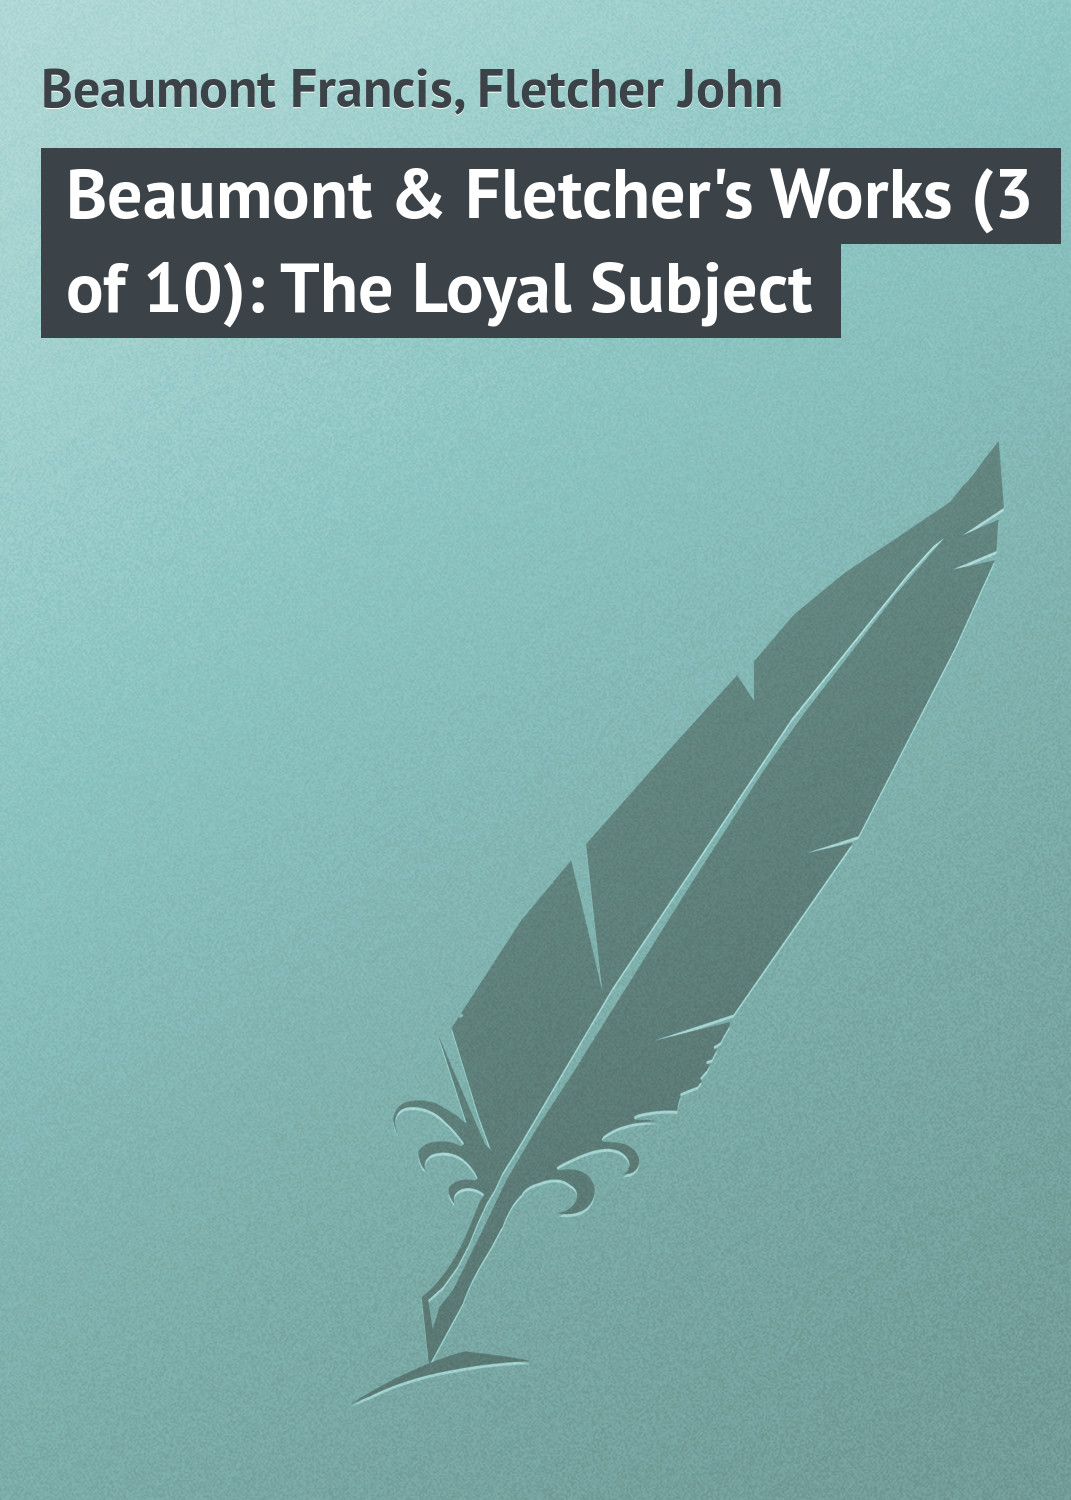 Beaumont&Fletcher's Works (3 of 10): The Loyal Subject